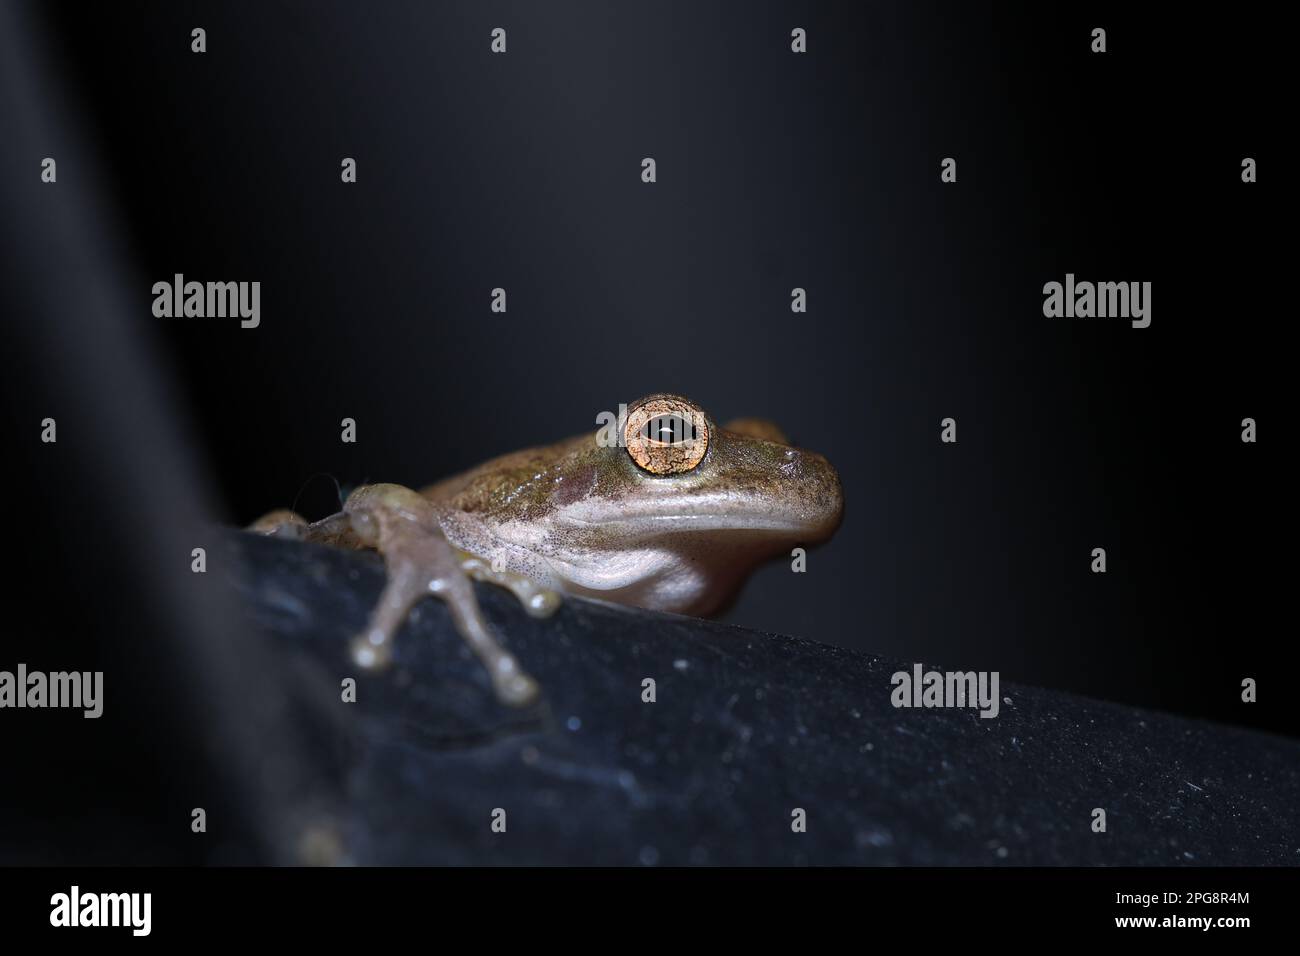 A green frog perched on the edge of a dark surface against a dark background Stock Photo